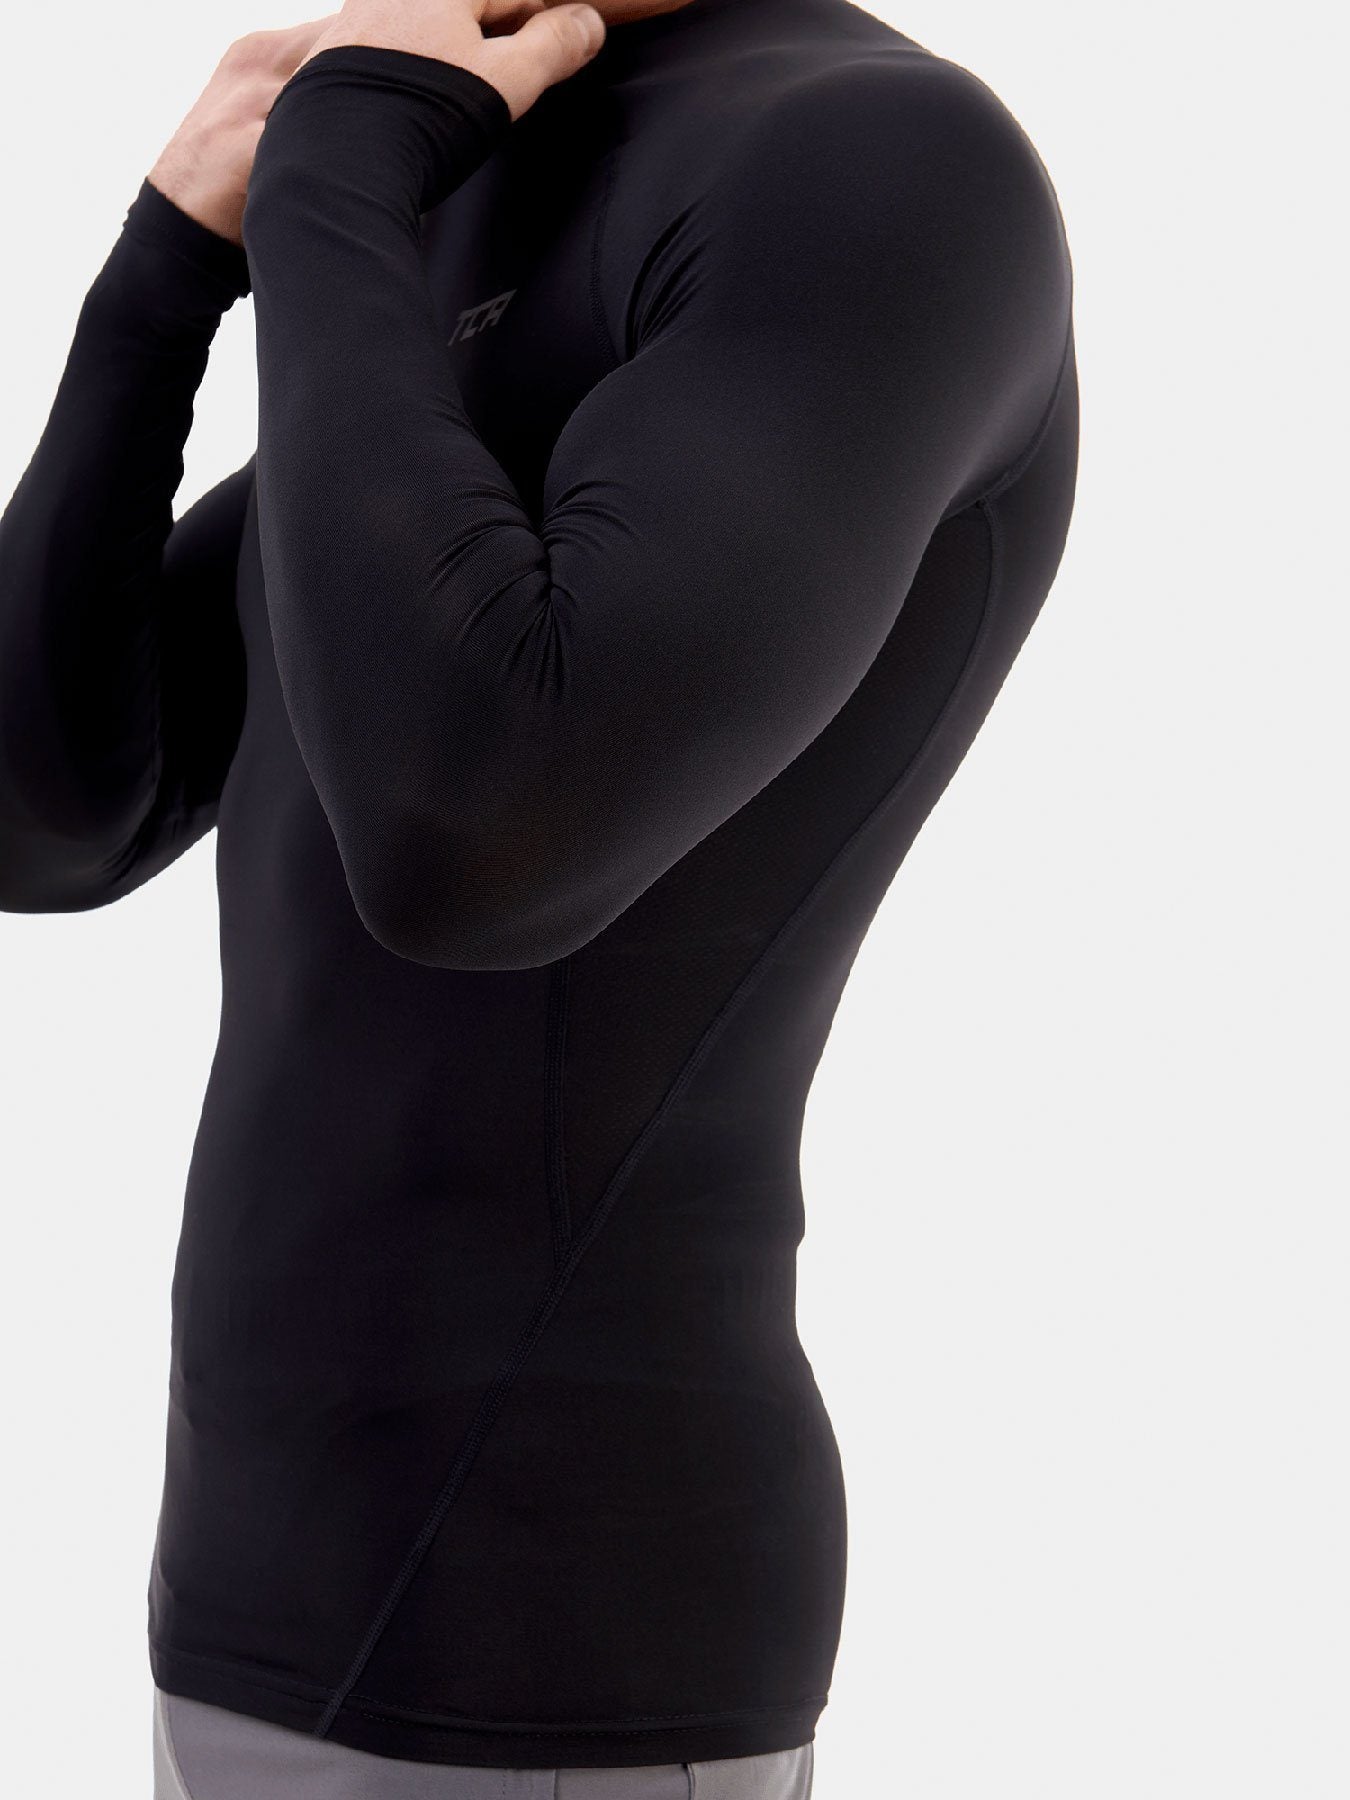 Power Compression Base Layer Long Sleeve Crew Neck For Men